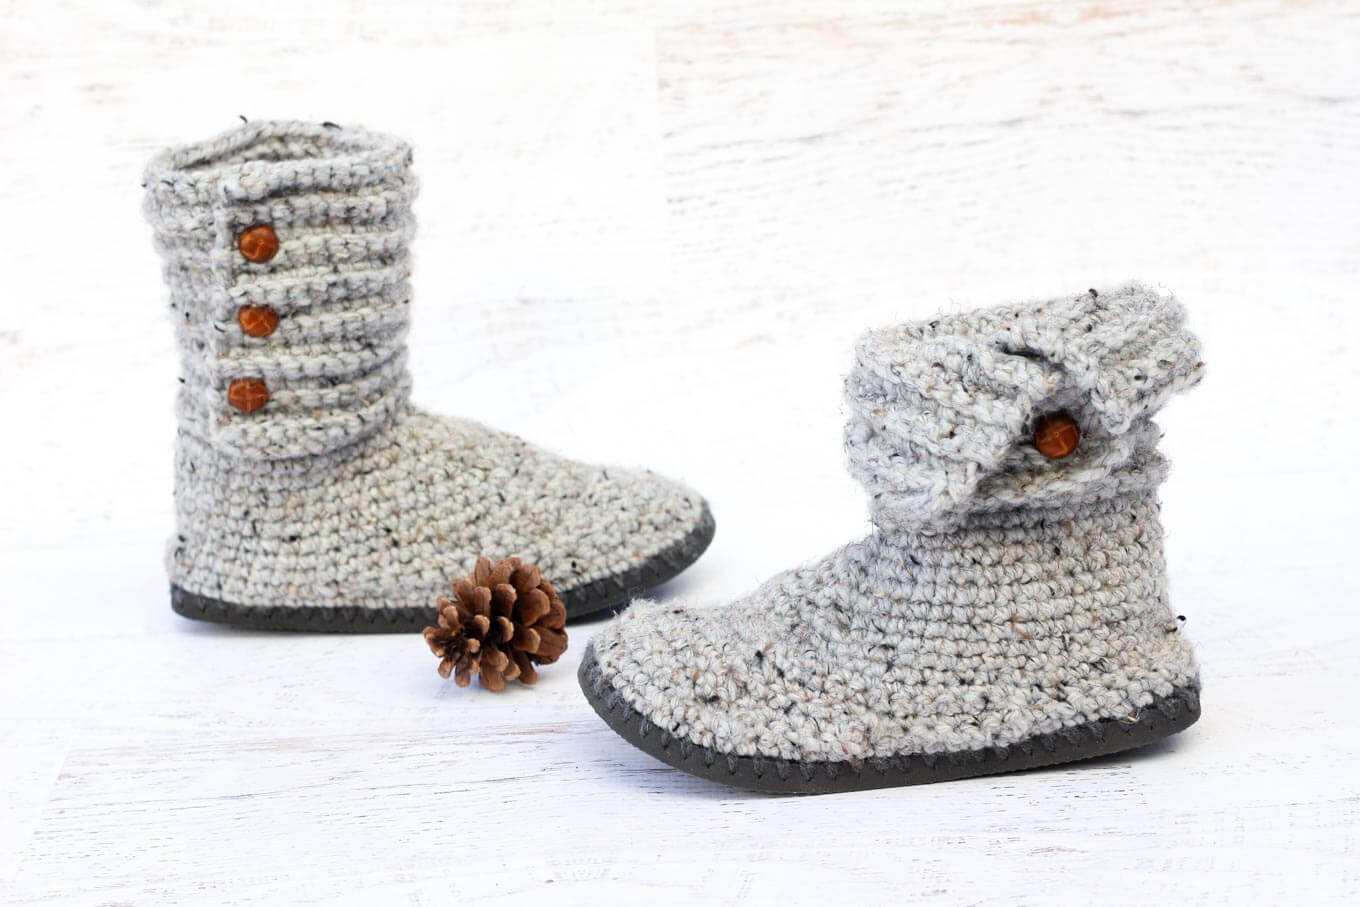 Crochet Slipper Boots Free Pattern How To Crochet Boots With Flip Flops Free Pattern Video Tutorial